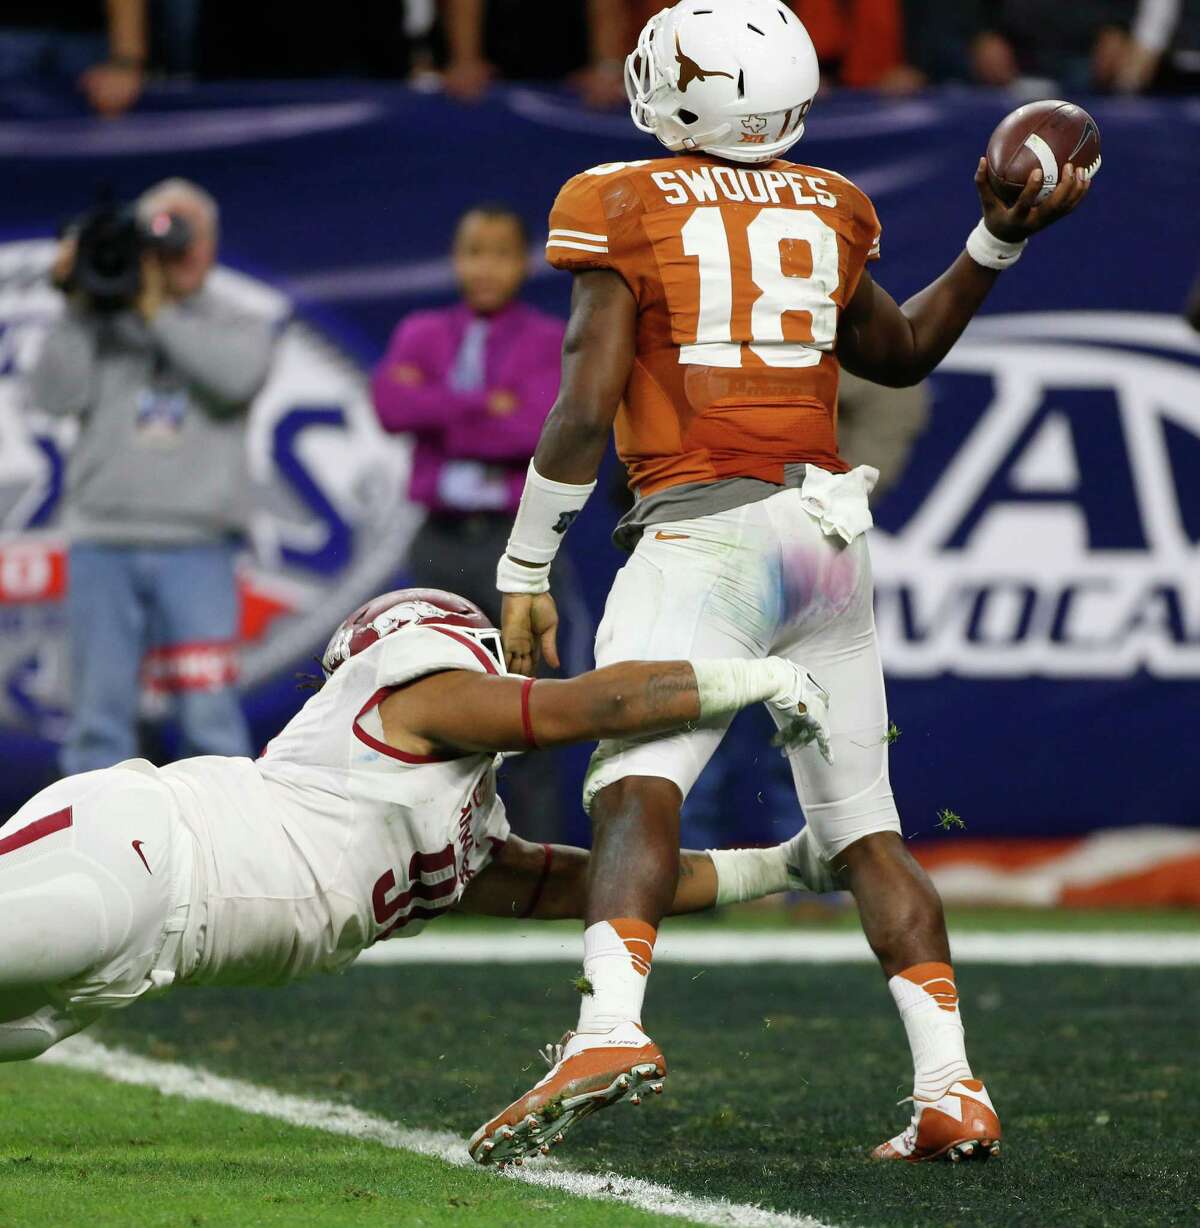 Texas quarterback Tyrone Swoopes tries to get the throw off in the end zone as he is tackled by Arkansas defensive tackle Darius Philon during the third quarter.